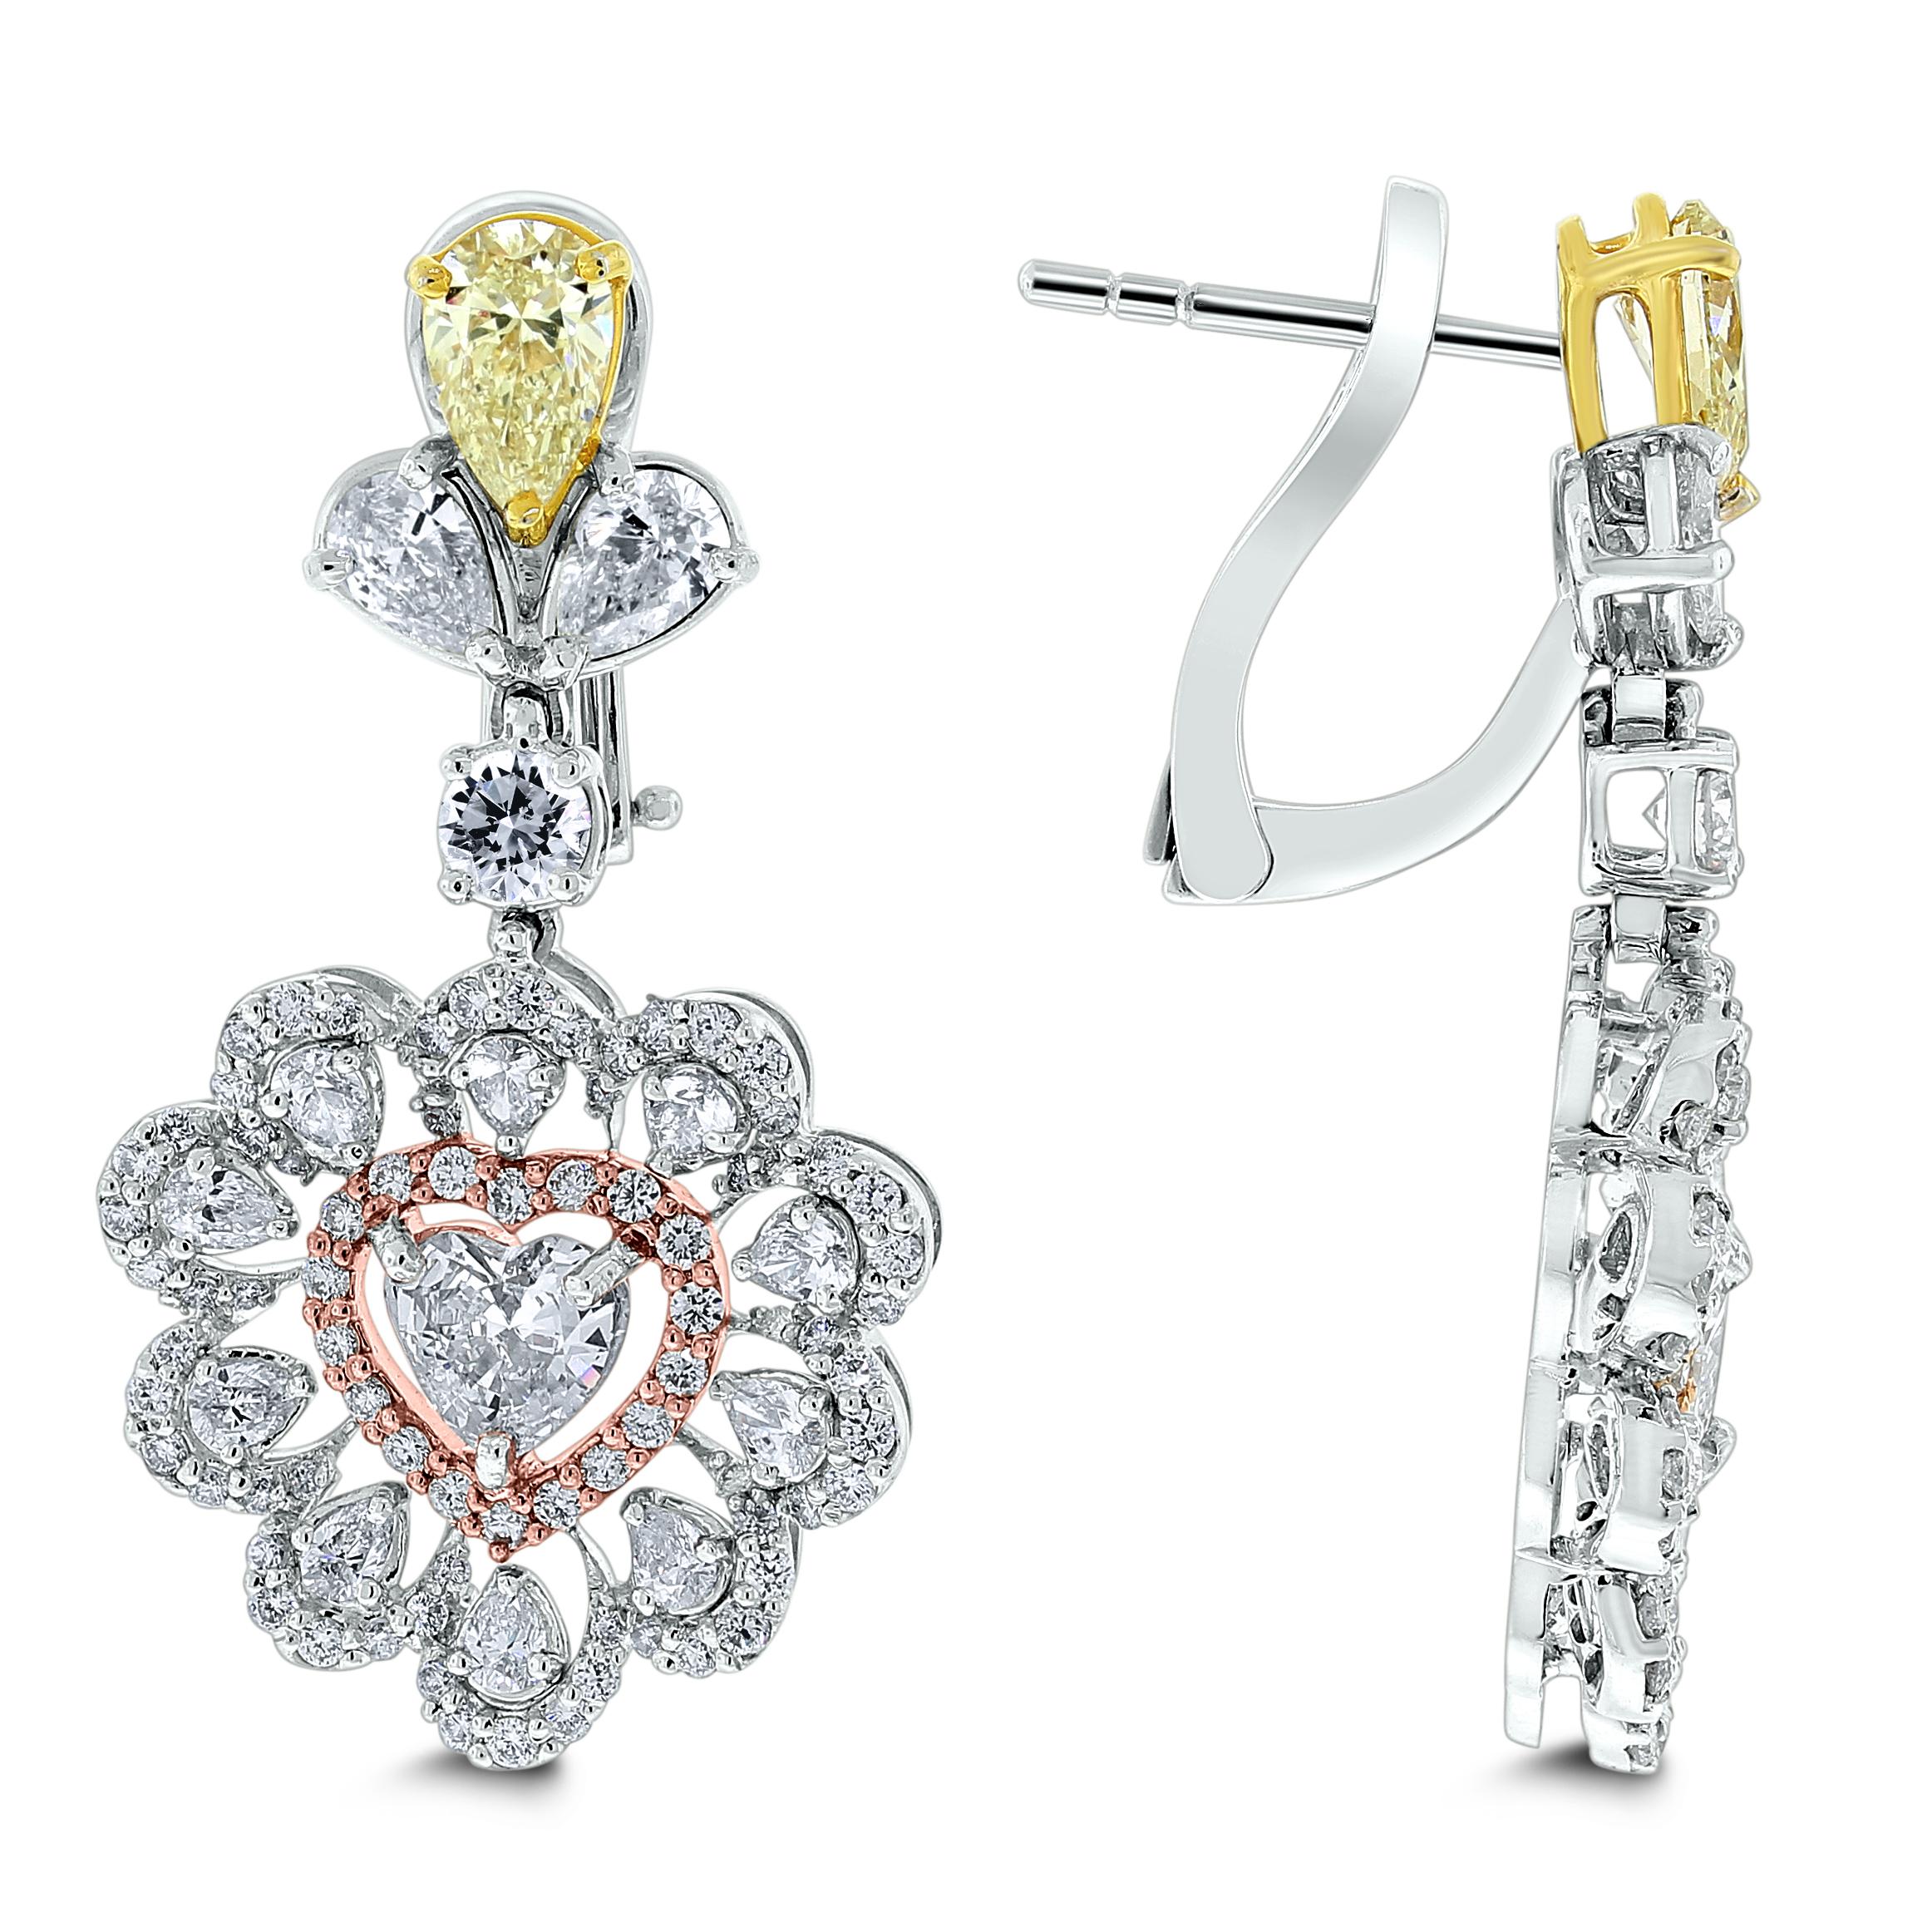 The Beauvince Amore Heart Diamond Earrings celebrate love and joy with their cheerful design and combination of shapes and colors.

Diamonds Shapes: Heart Shape, Pear & Round
Total Diamonds Weight: 5.61 ct
Center Solitaires: Heart Shapes 1.09 ct (2